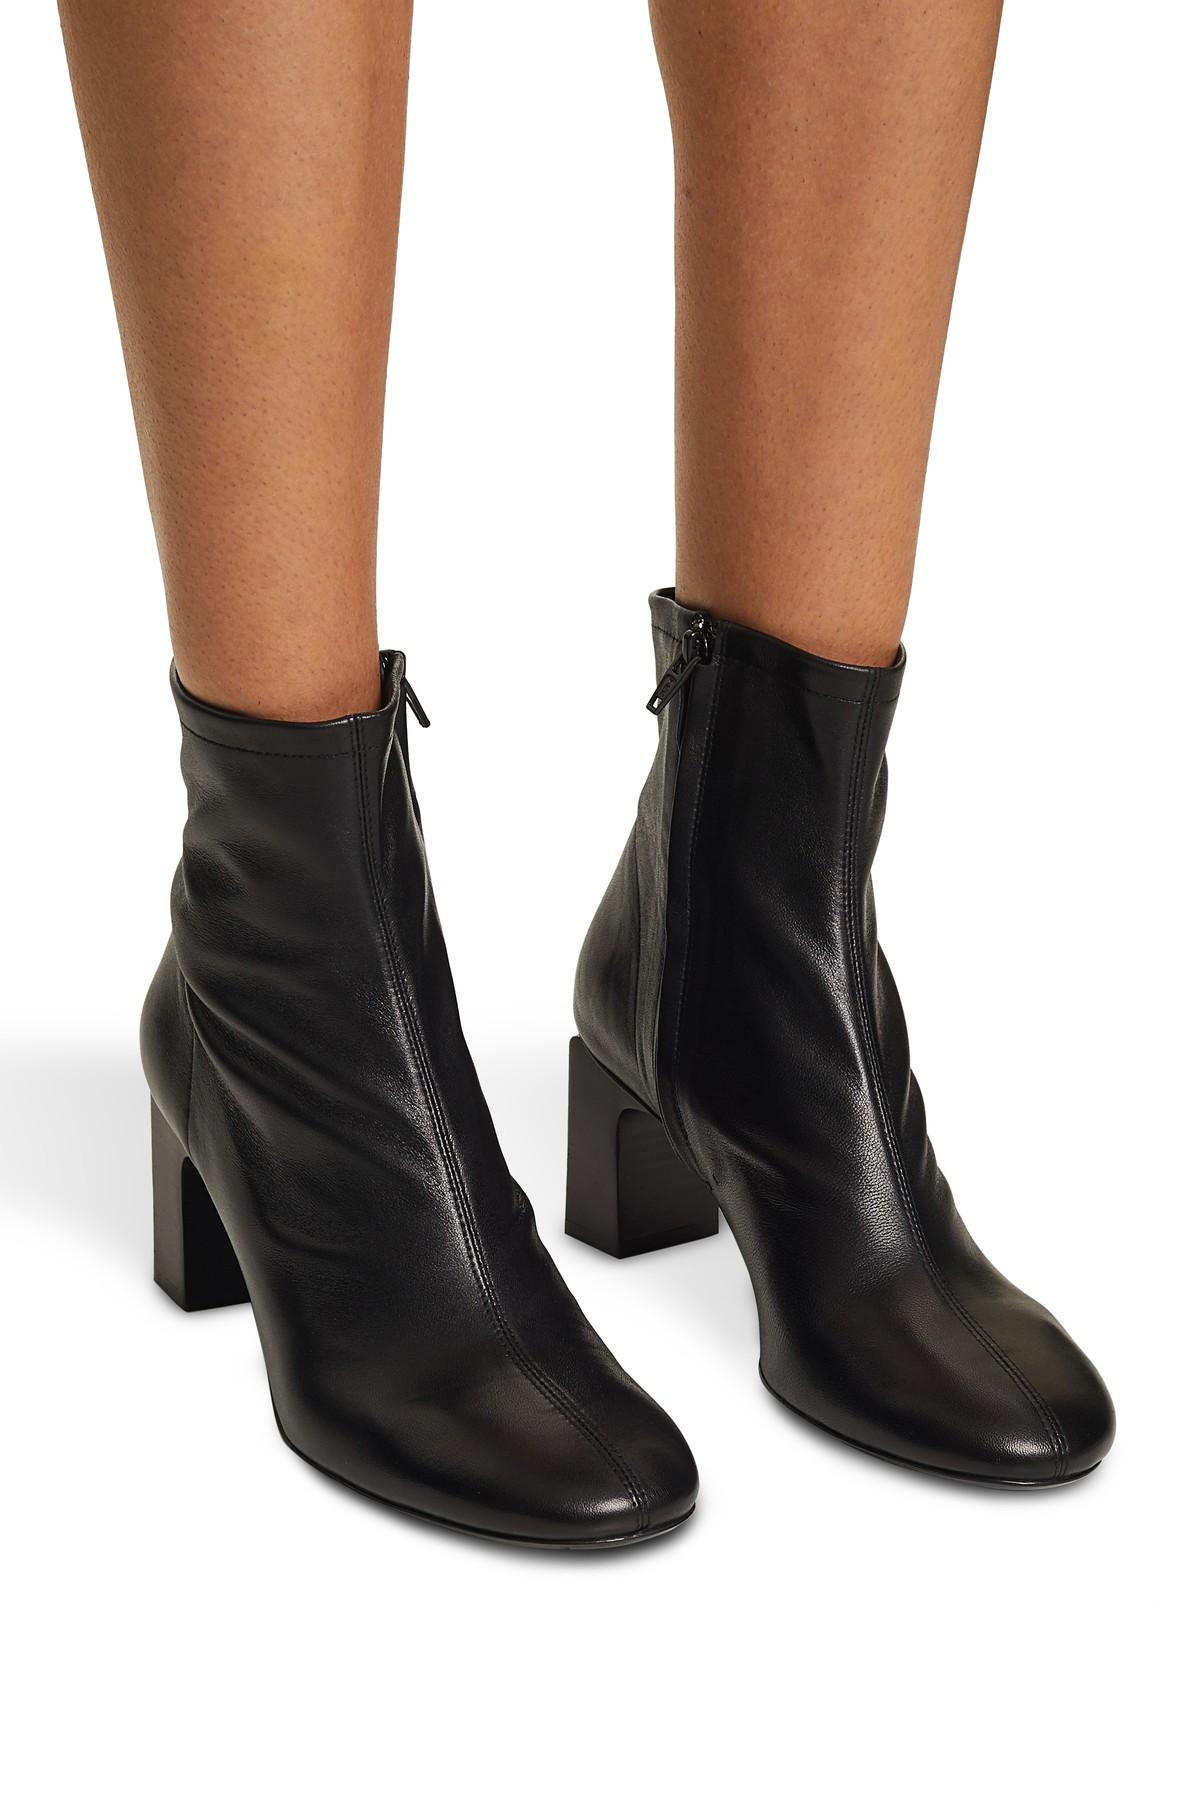 BY FAR Vasi Ankle Boots in Black | Lyst Australia